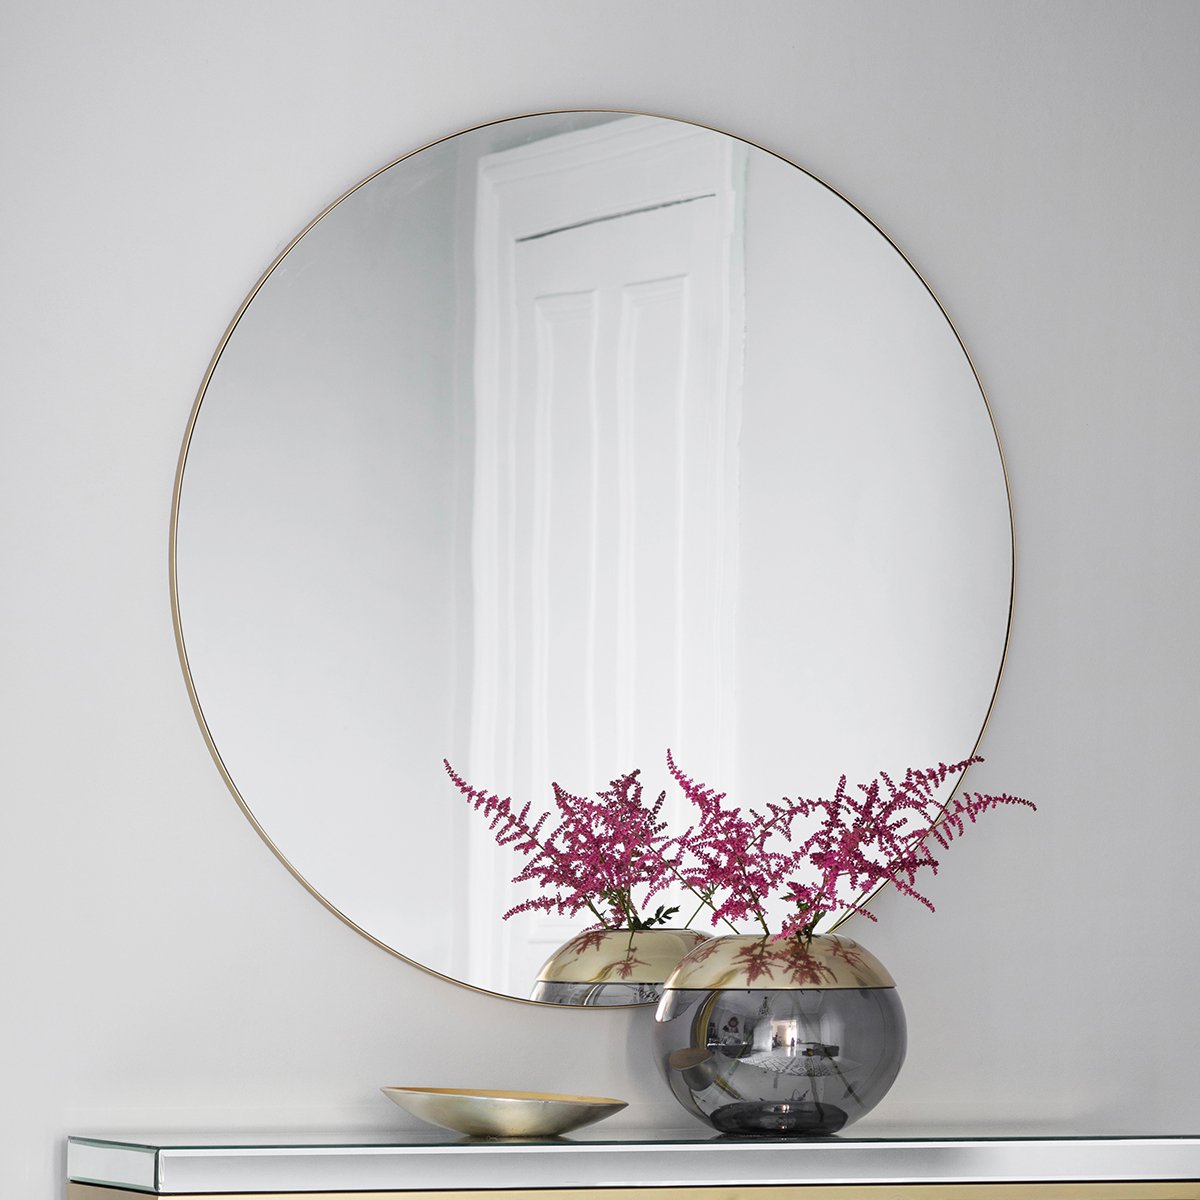 Gallery Direct Hayle Round Mirror Champagne Outlet